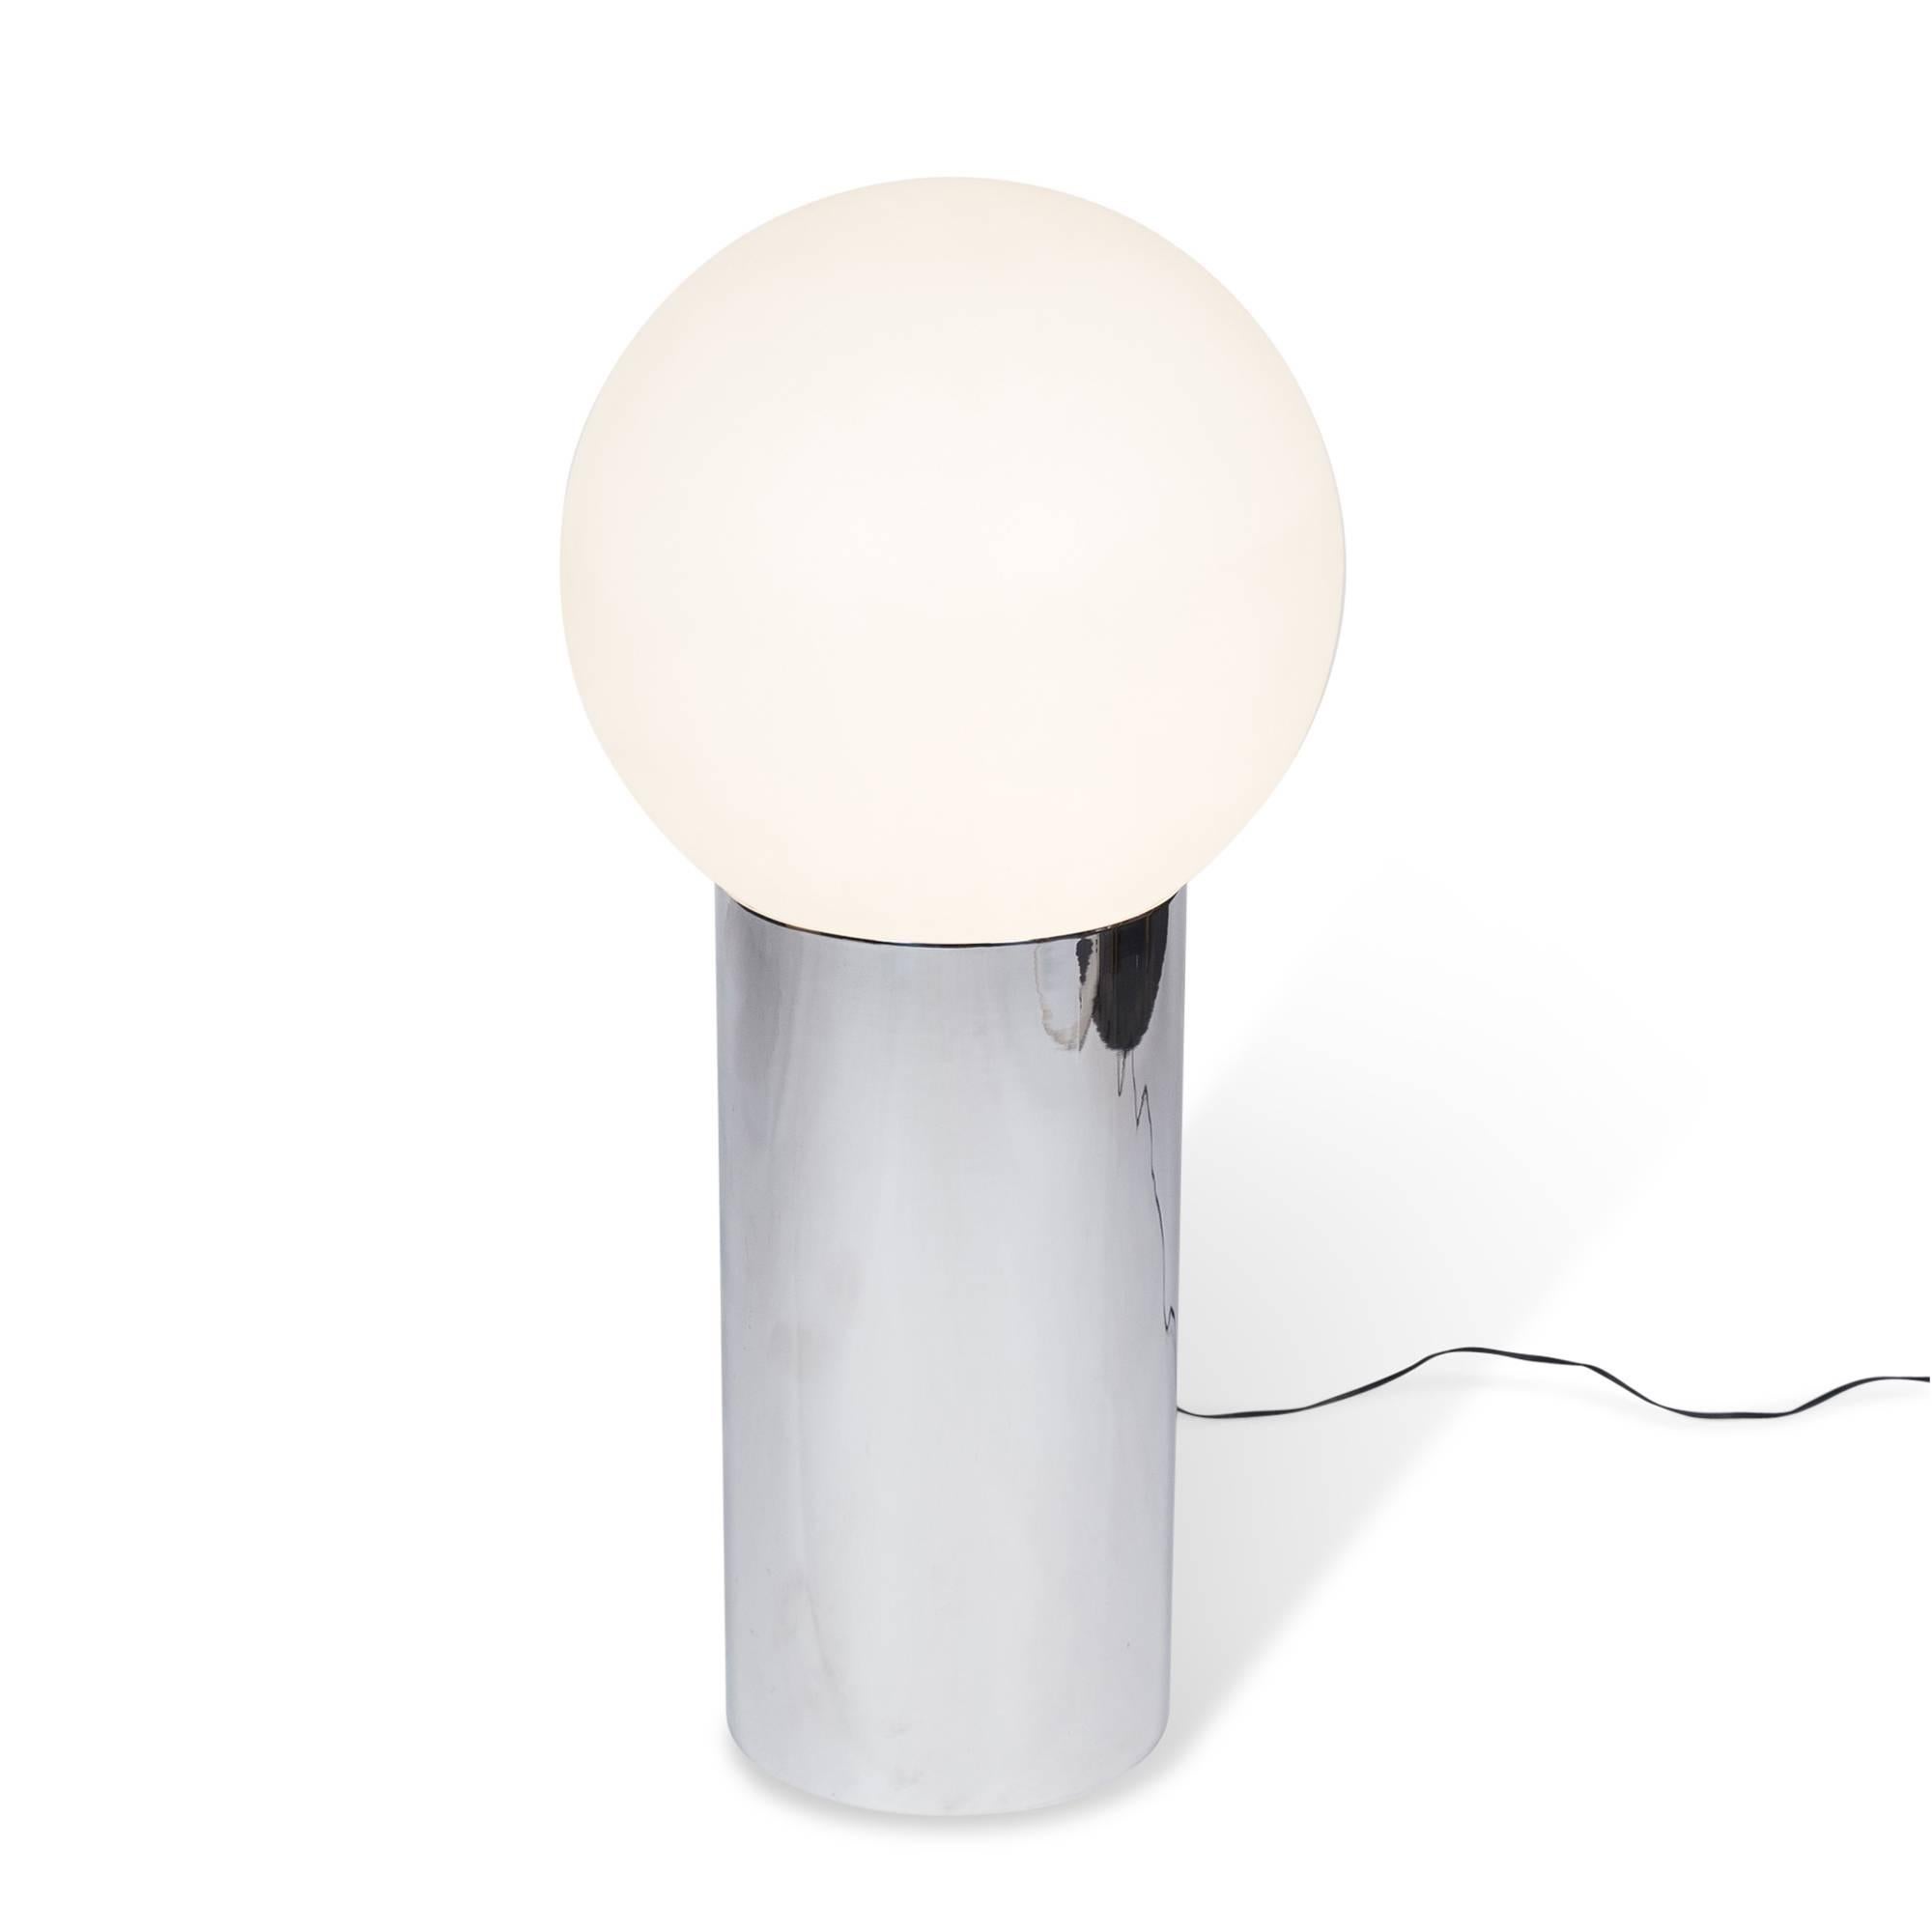 Poly sphere floor lamp, or tall table lamp, the sphere mounted on a cylindrical chrome column, by Sonneman, United States, 1970s. Measures: Height 35 in, diameter of sphere 16 in.